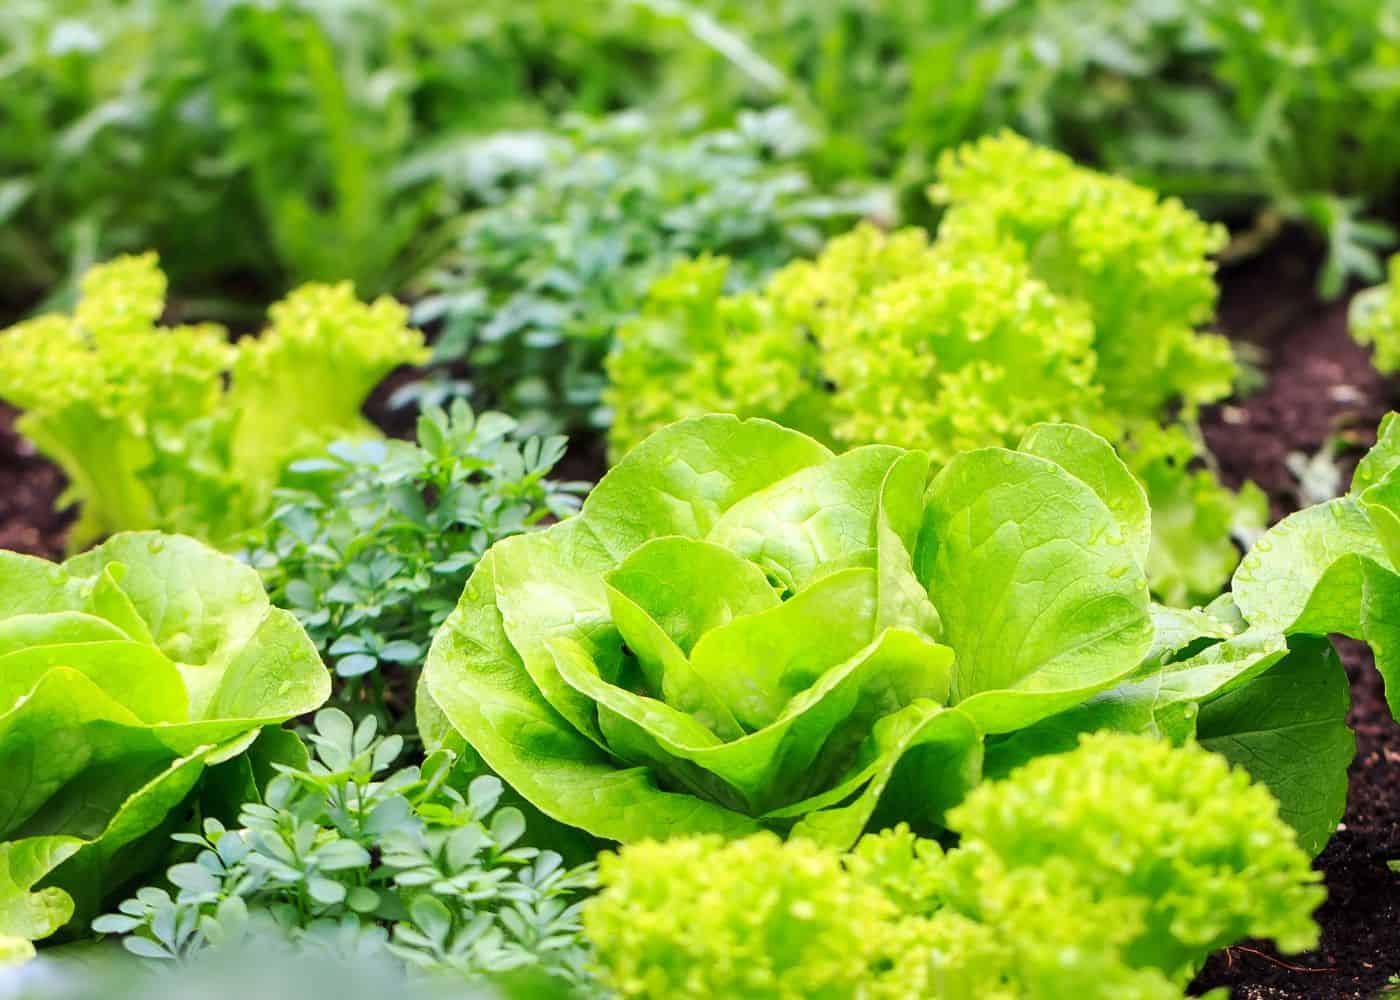 Growing your own lettuce and salad greens